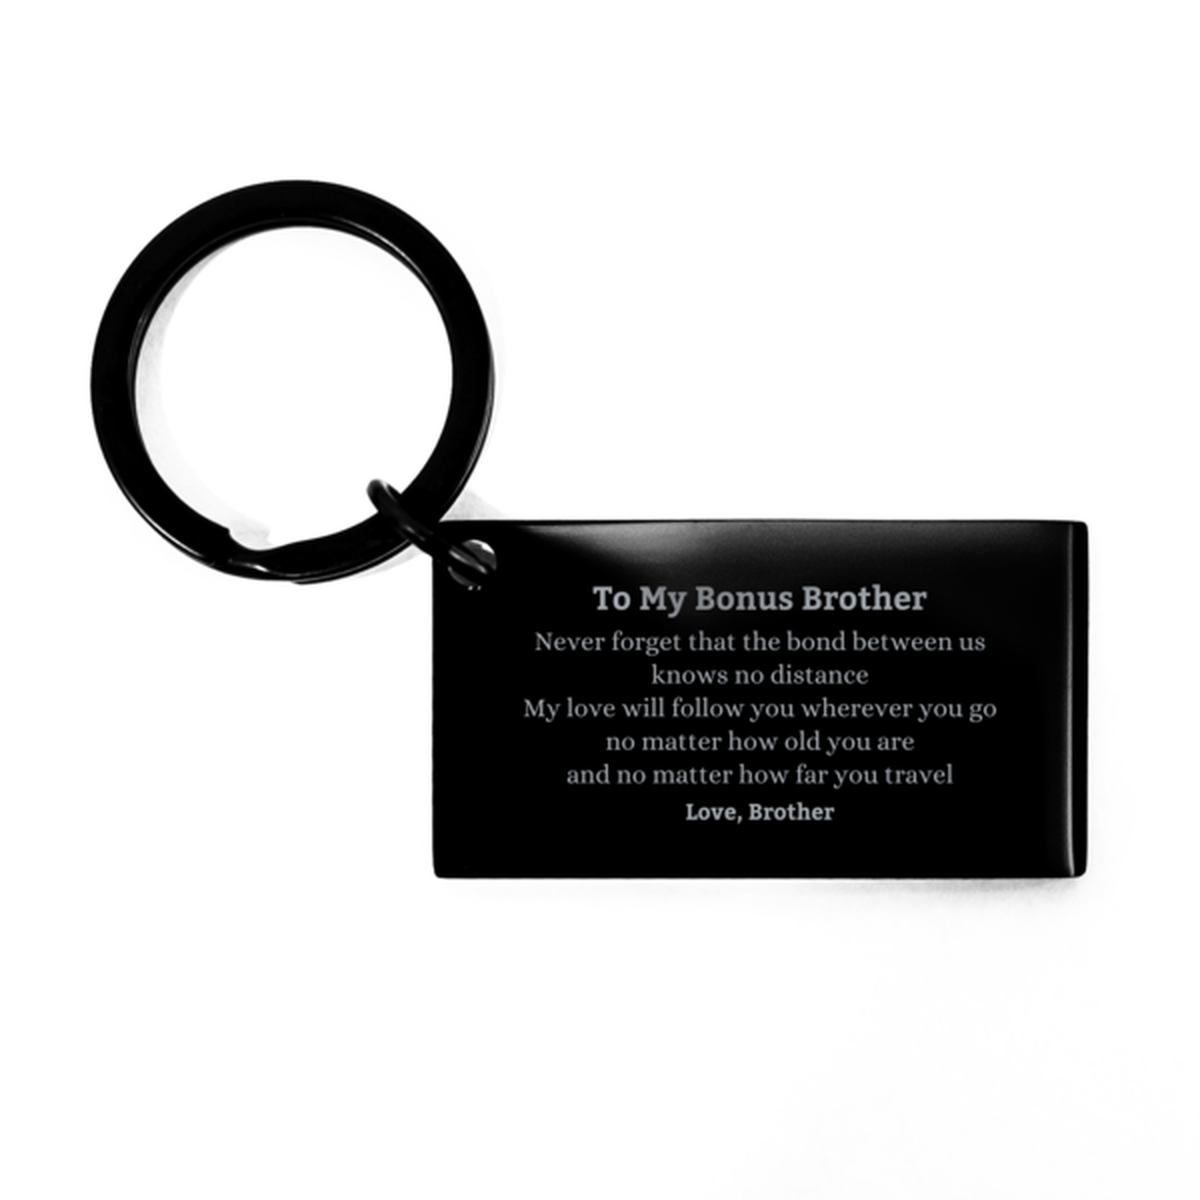 Bonus Brother Birthday Gifts from Brother, Adjustable Keychain for Bonus Brother Christmas Graduation Unique Gifts Bonus Brother Never forget that the bond between us knows no distance. Love, Brother